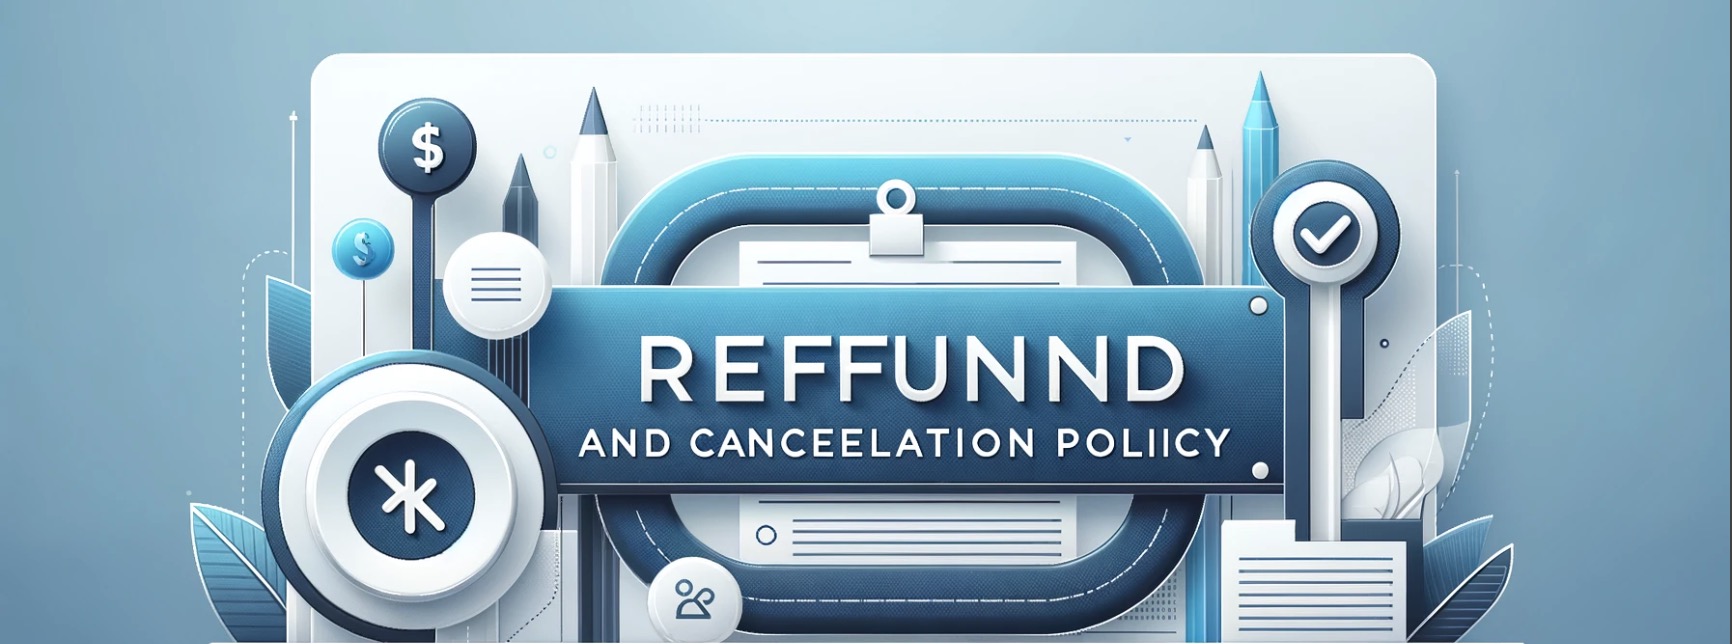 Refund and Cancellation Policy